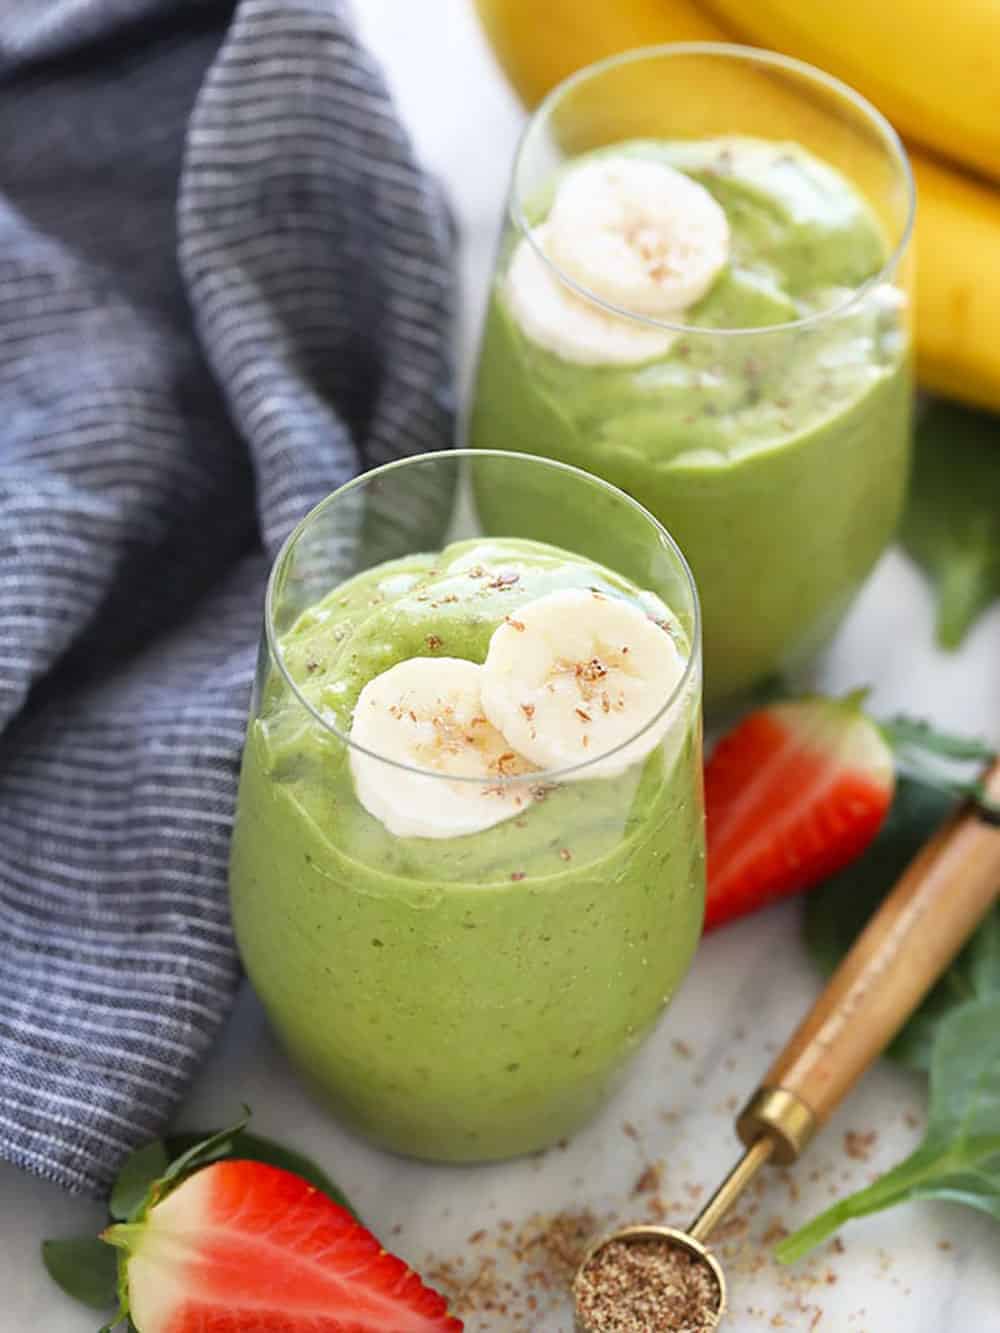 Best Green Smoothie - Fit Foodie Finds